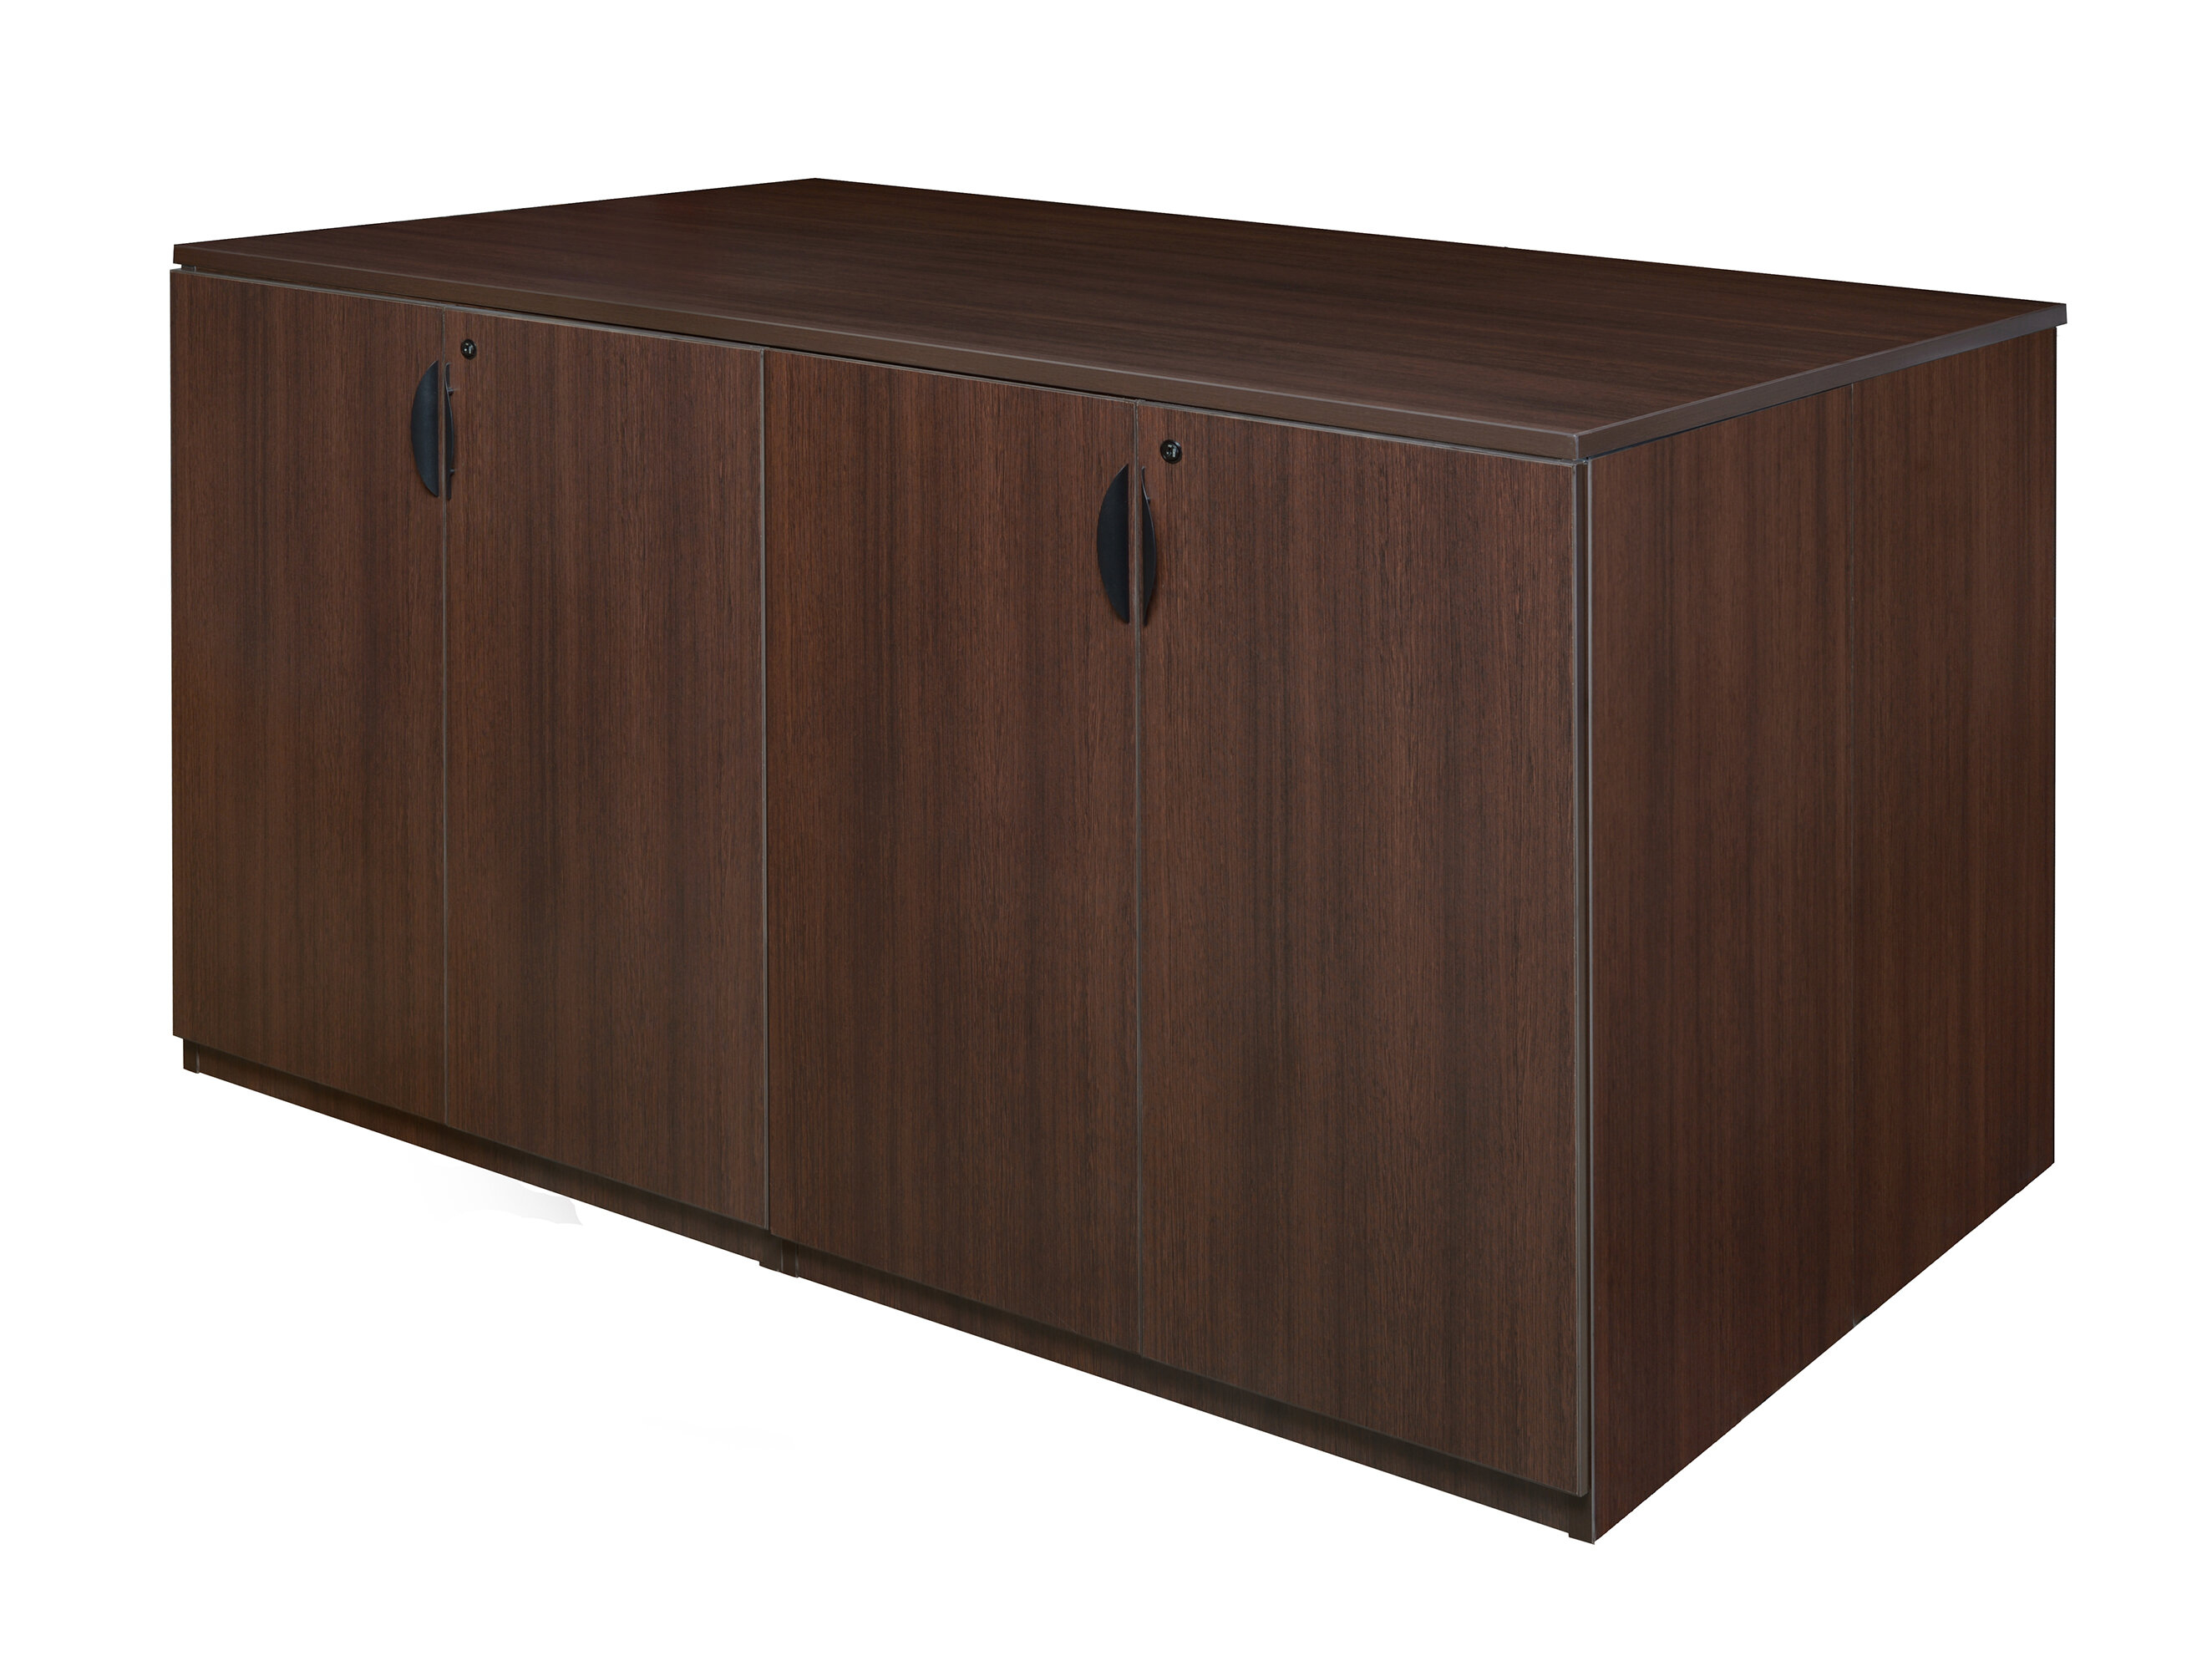 Latitude Run Linh 6 Drawer Lateral Filing Cabinet Wayfairca pertaining to size 2648 X 2000